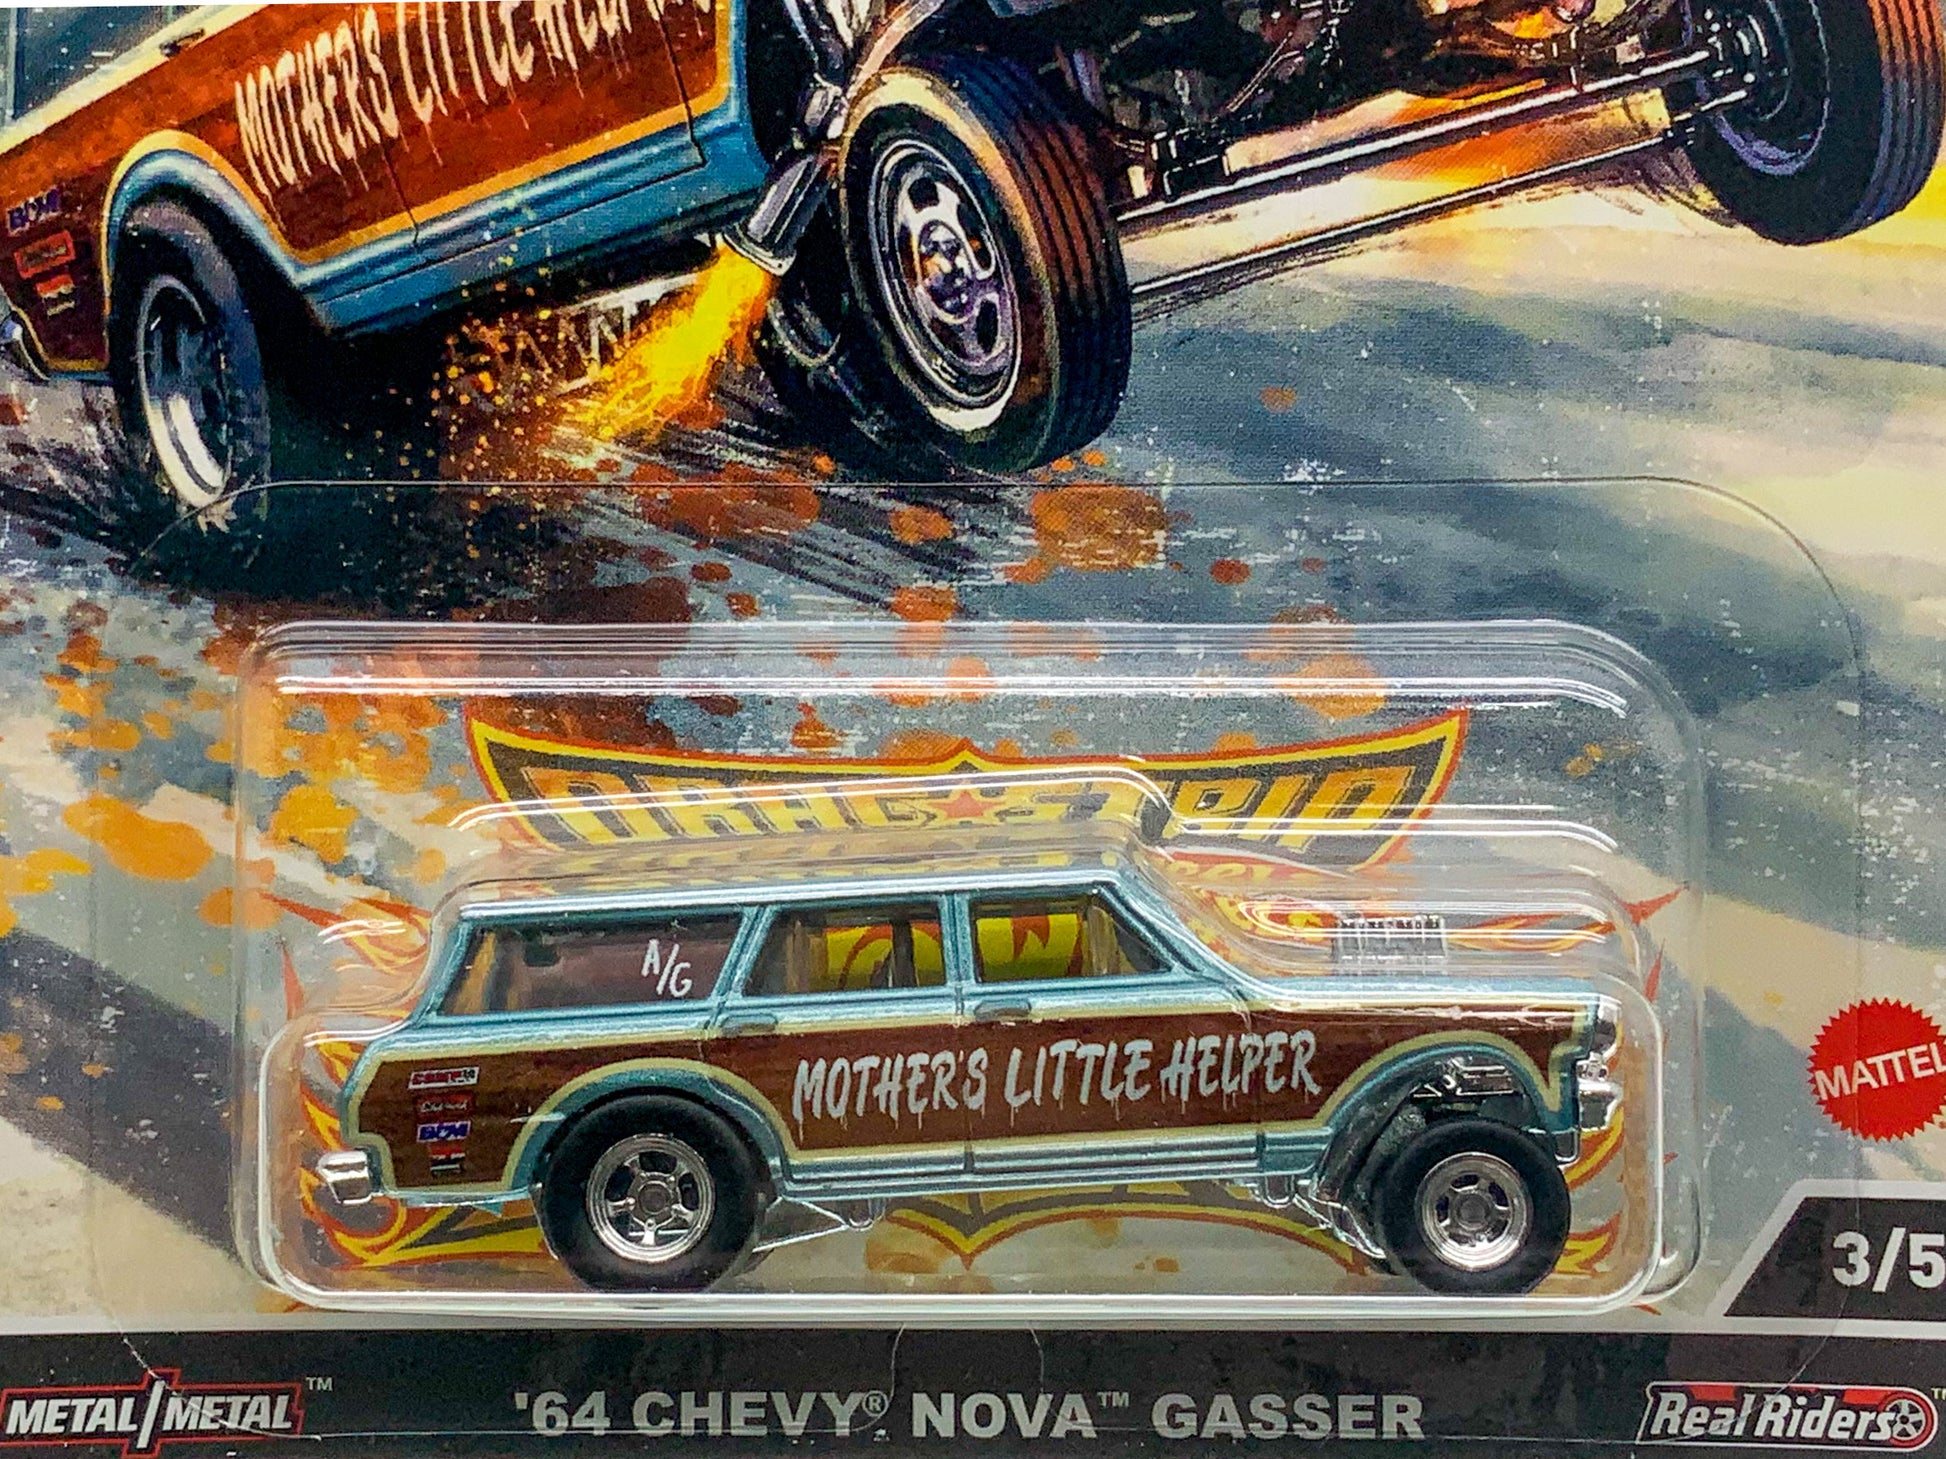 Buy at Tatoyshop.com Hot Wheels Car Culture  2022 Hot Wheels Car Culture Dragstrip Demons Series '64 Chevy Nova Wagon Gasser 3/5  Number 1 from the set of 5 Dragstrip Demons Series Premium Real Riders Metal Mattel FPY86 Shop Now   Mr Toys Kmart Target Big W  International and Domestic delivery by Auspost 